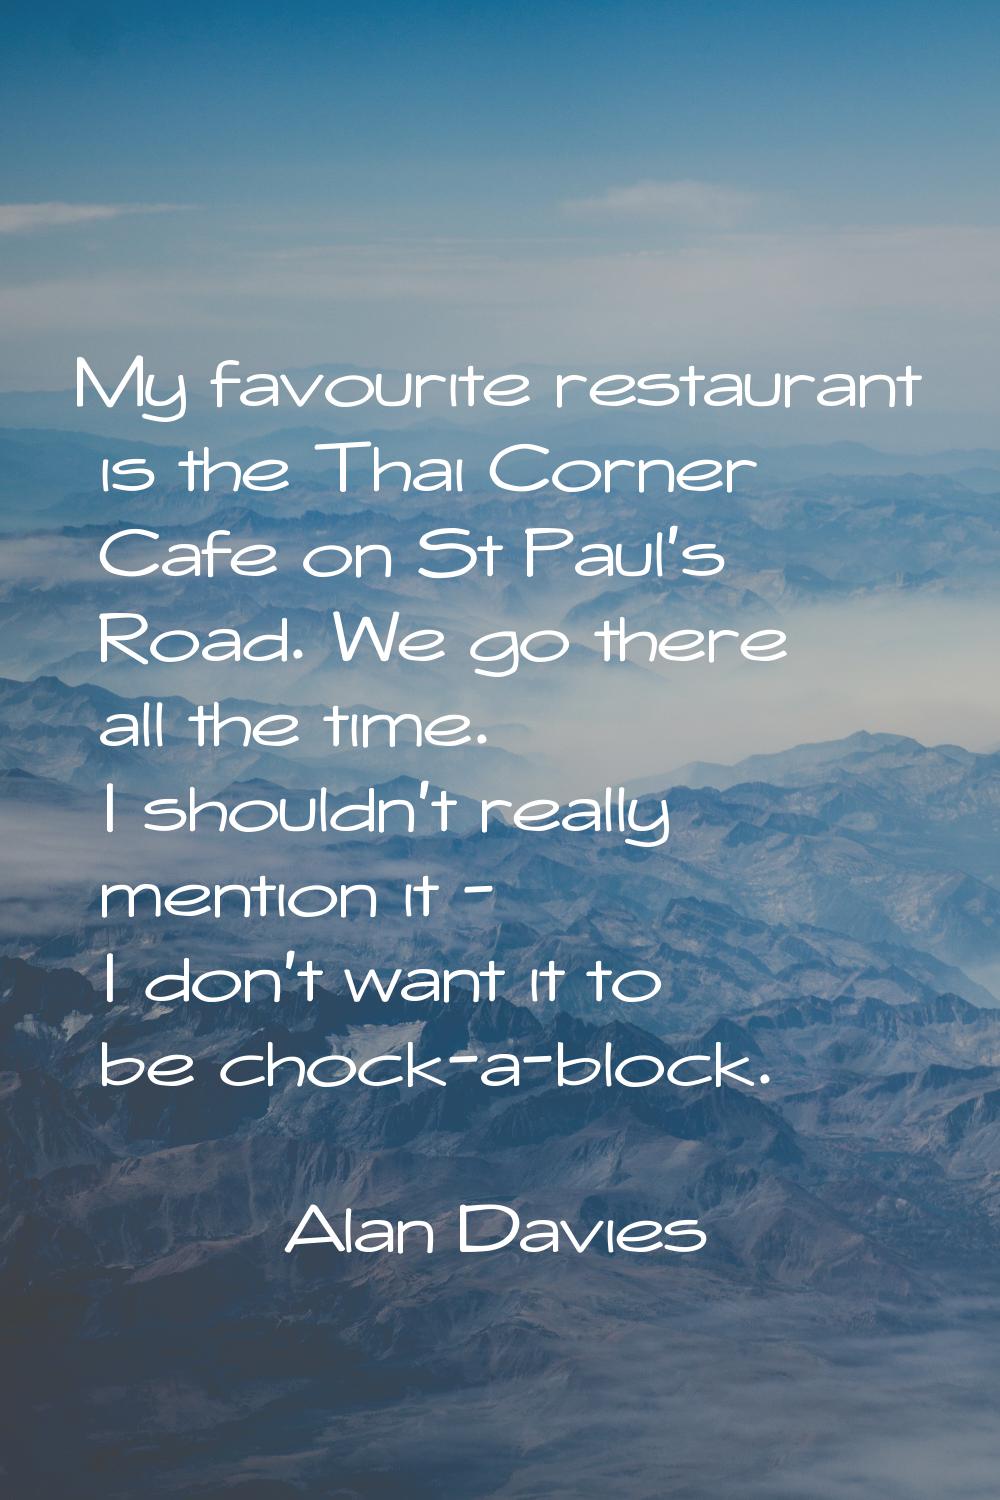 My favourite restaurant is the Thai Corner Cafe on St Paul's Road. We go there all the time. I shou